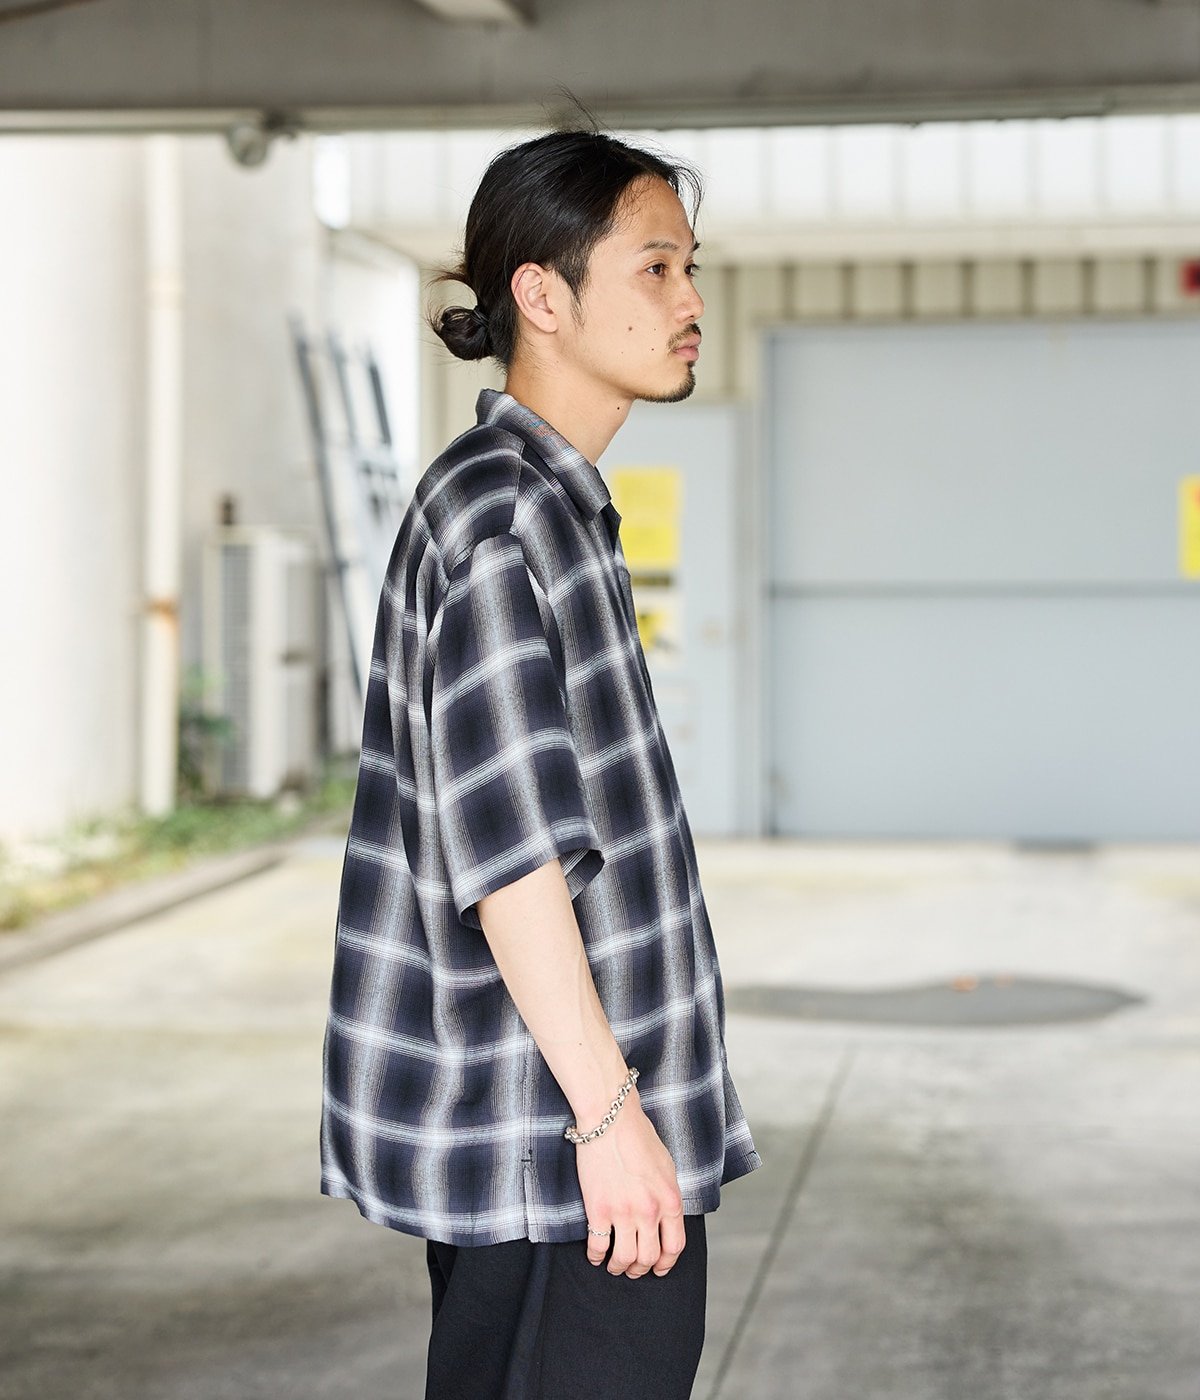 ONLY ARK】RAYON CHECK S/S OPEN SHIRT | GOLD(ゴールド) / トップス